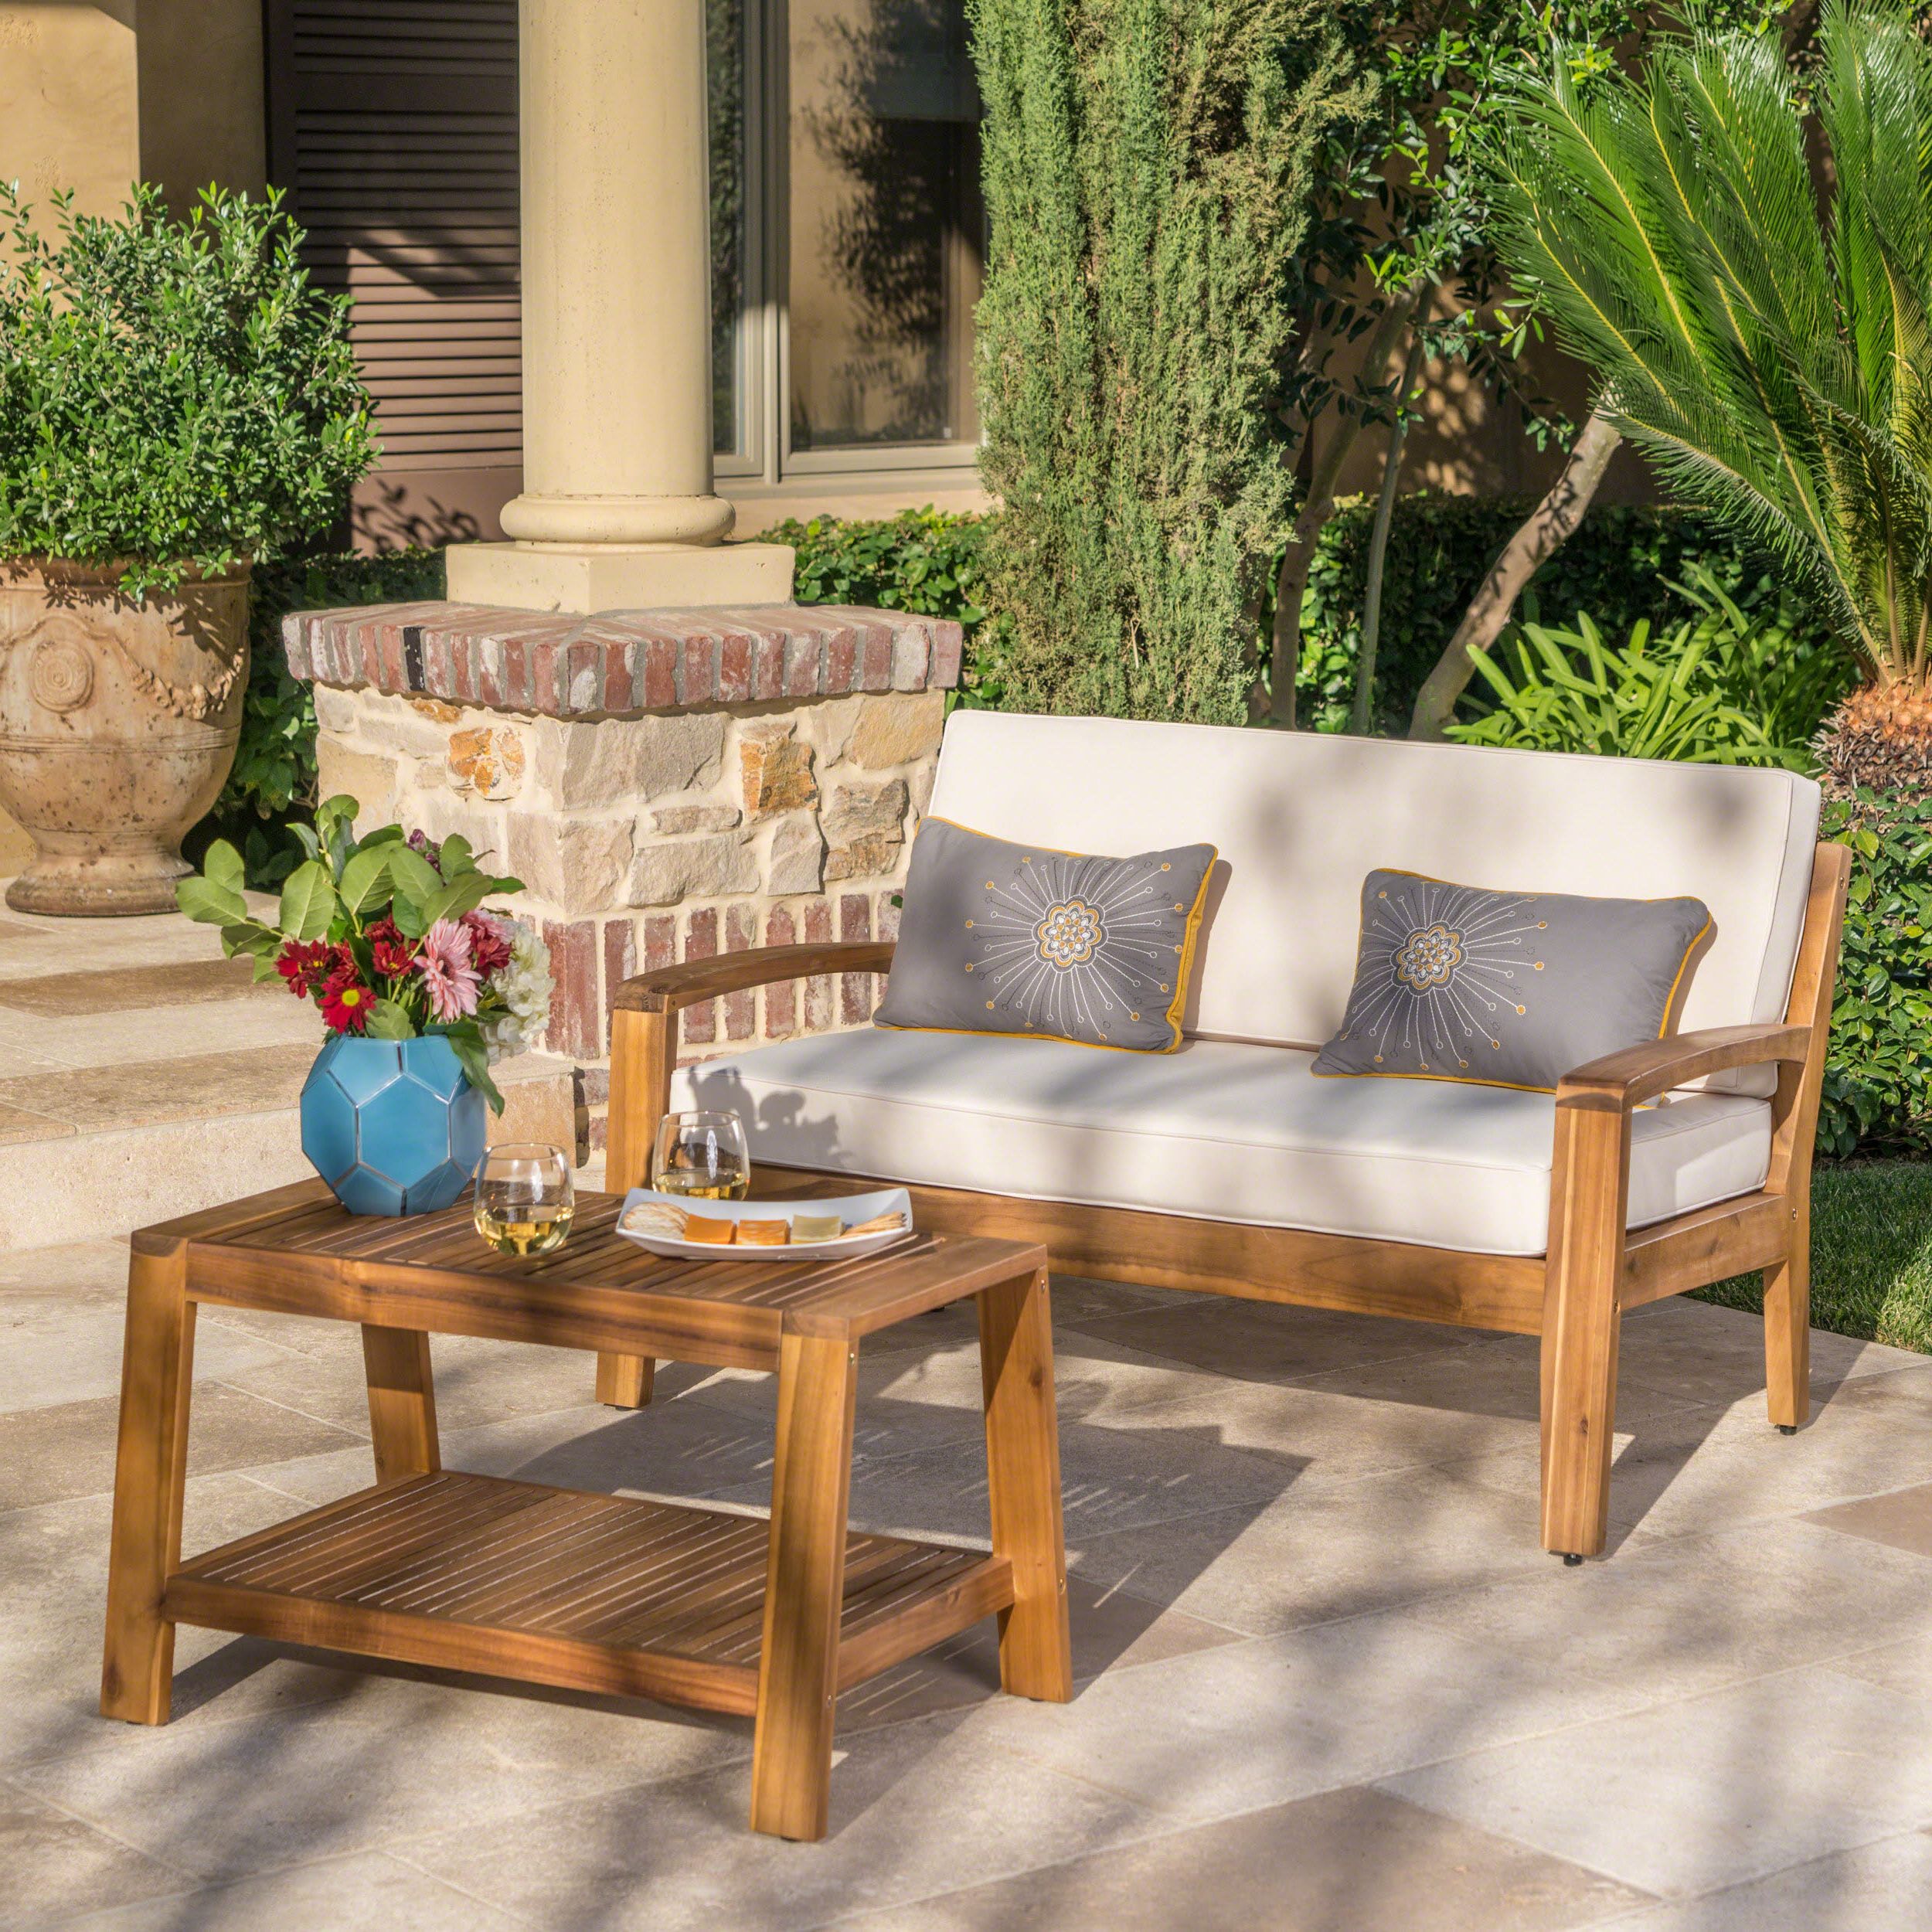 2018 Christian Outdoor Acacia Wood Loveseat And Coffee Table Inside Ecru And Otter Coffee Tables (View 14 of 20)